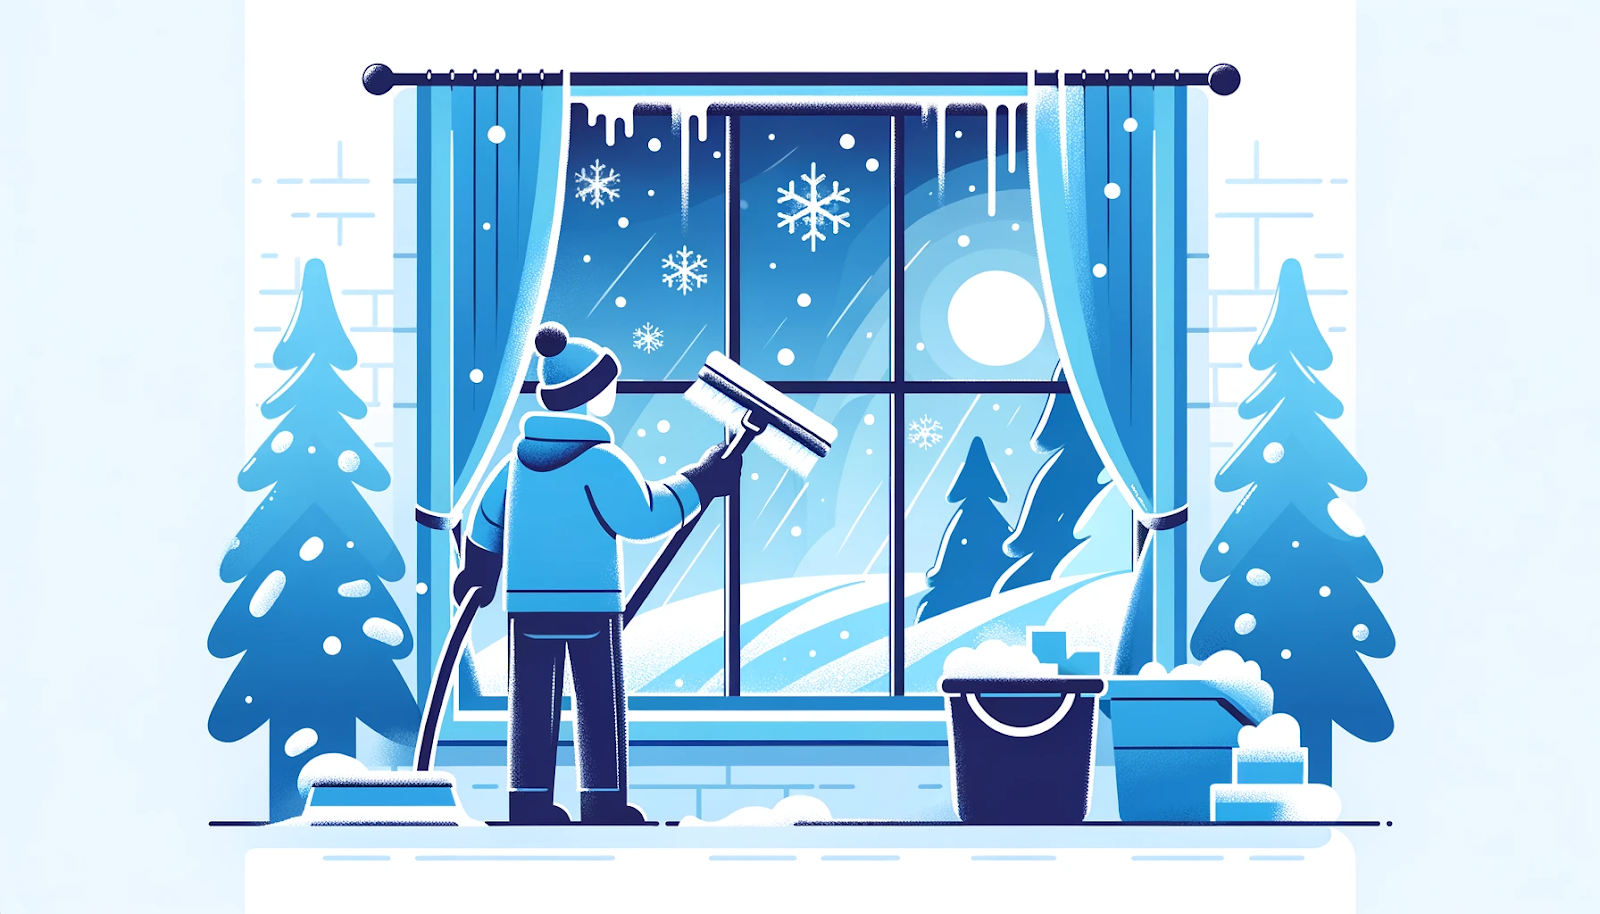 Illustration of window cleaning in winter. The image shows a person cleaning windows with cold weather and snow in the background. The color scheme includes cool and icy tones to represent the winter season.